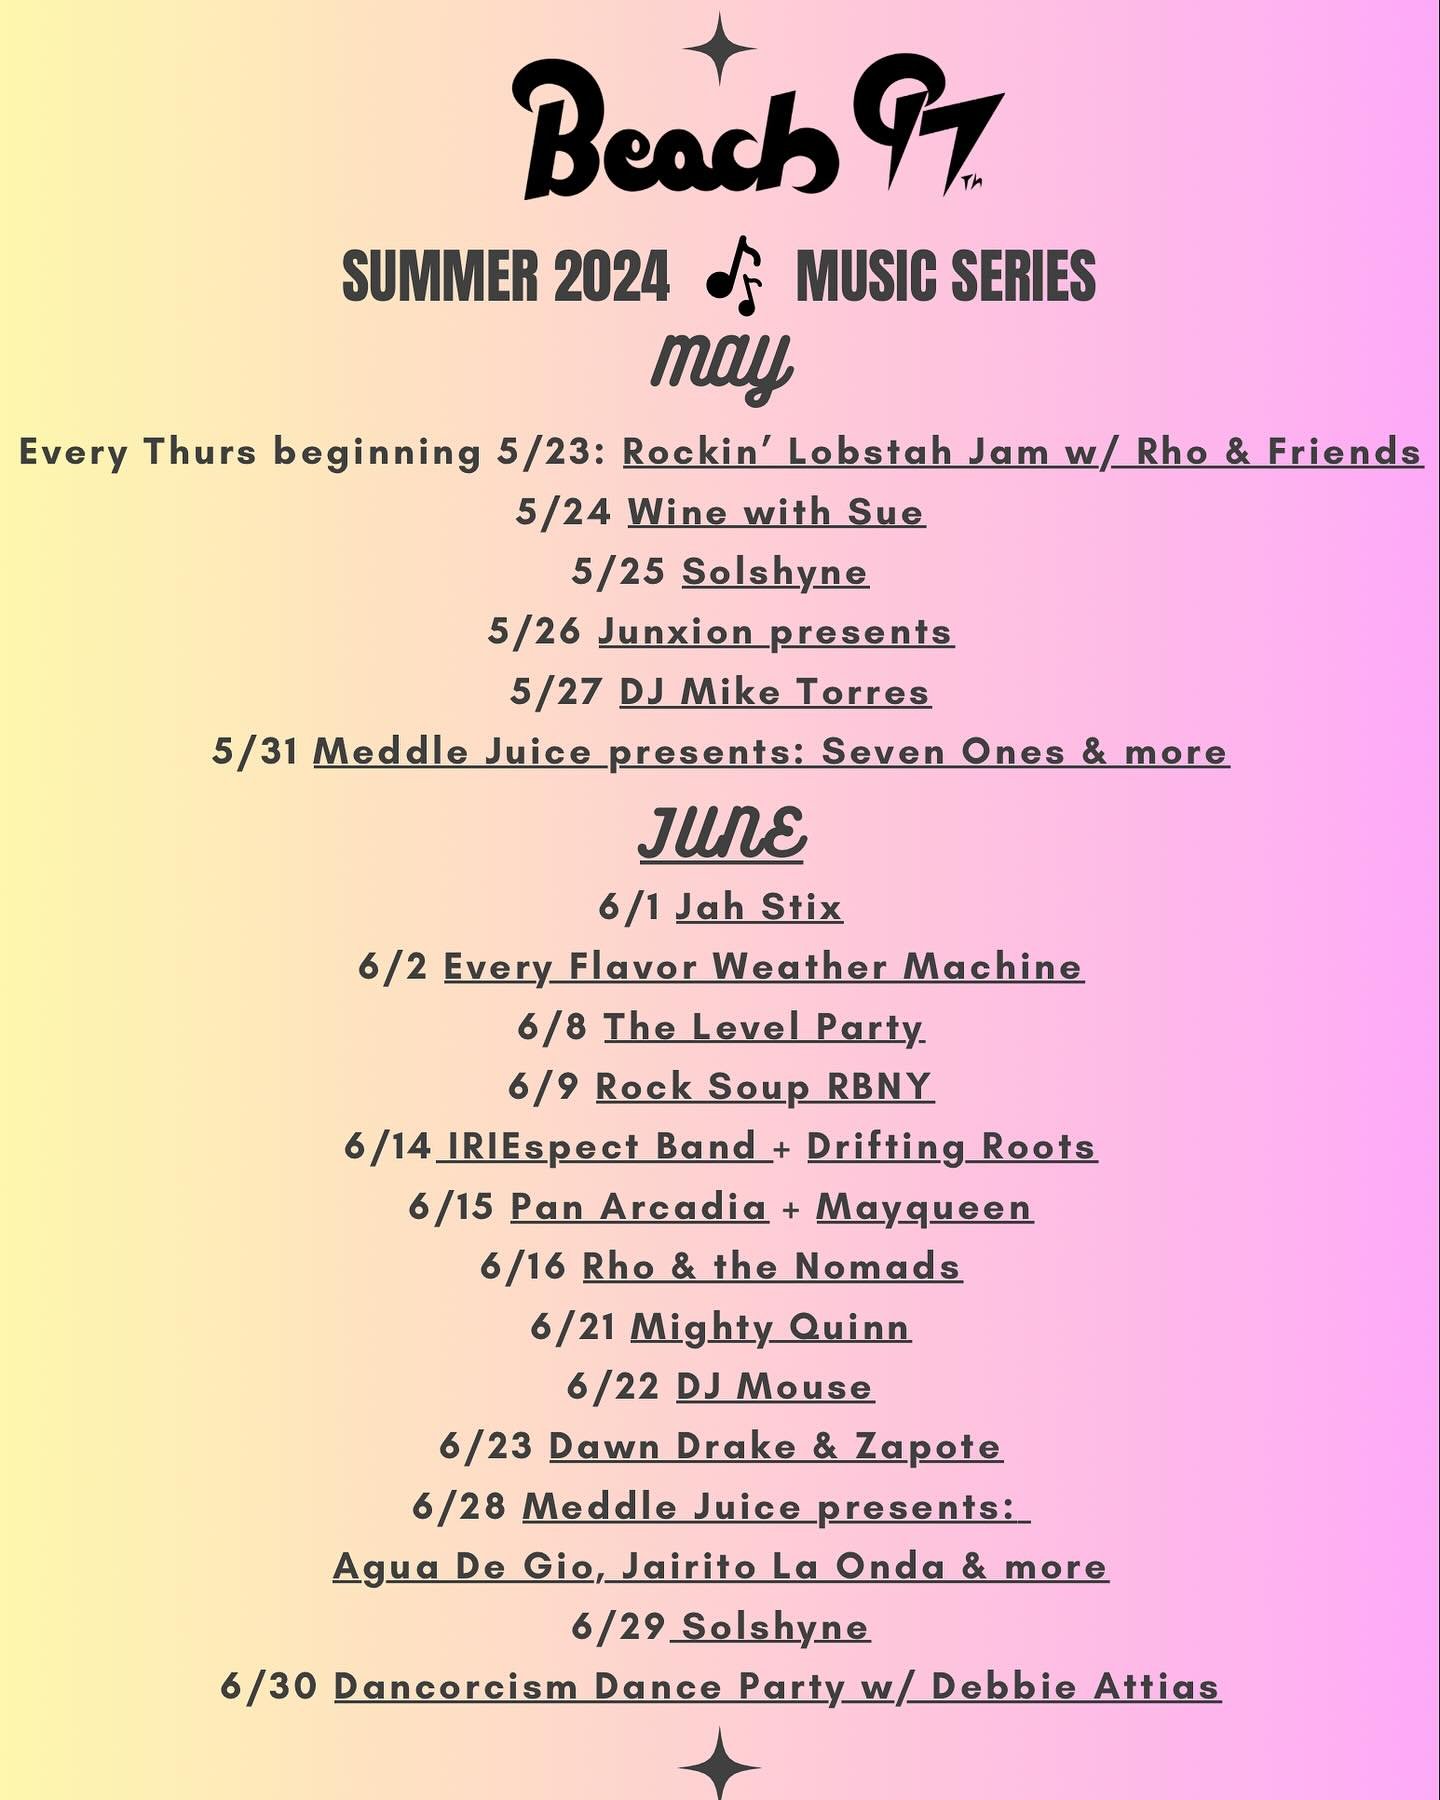 Presenting the live soundtrack this summer at Beach 97th. Find your jam and pull up.